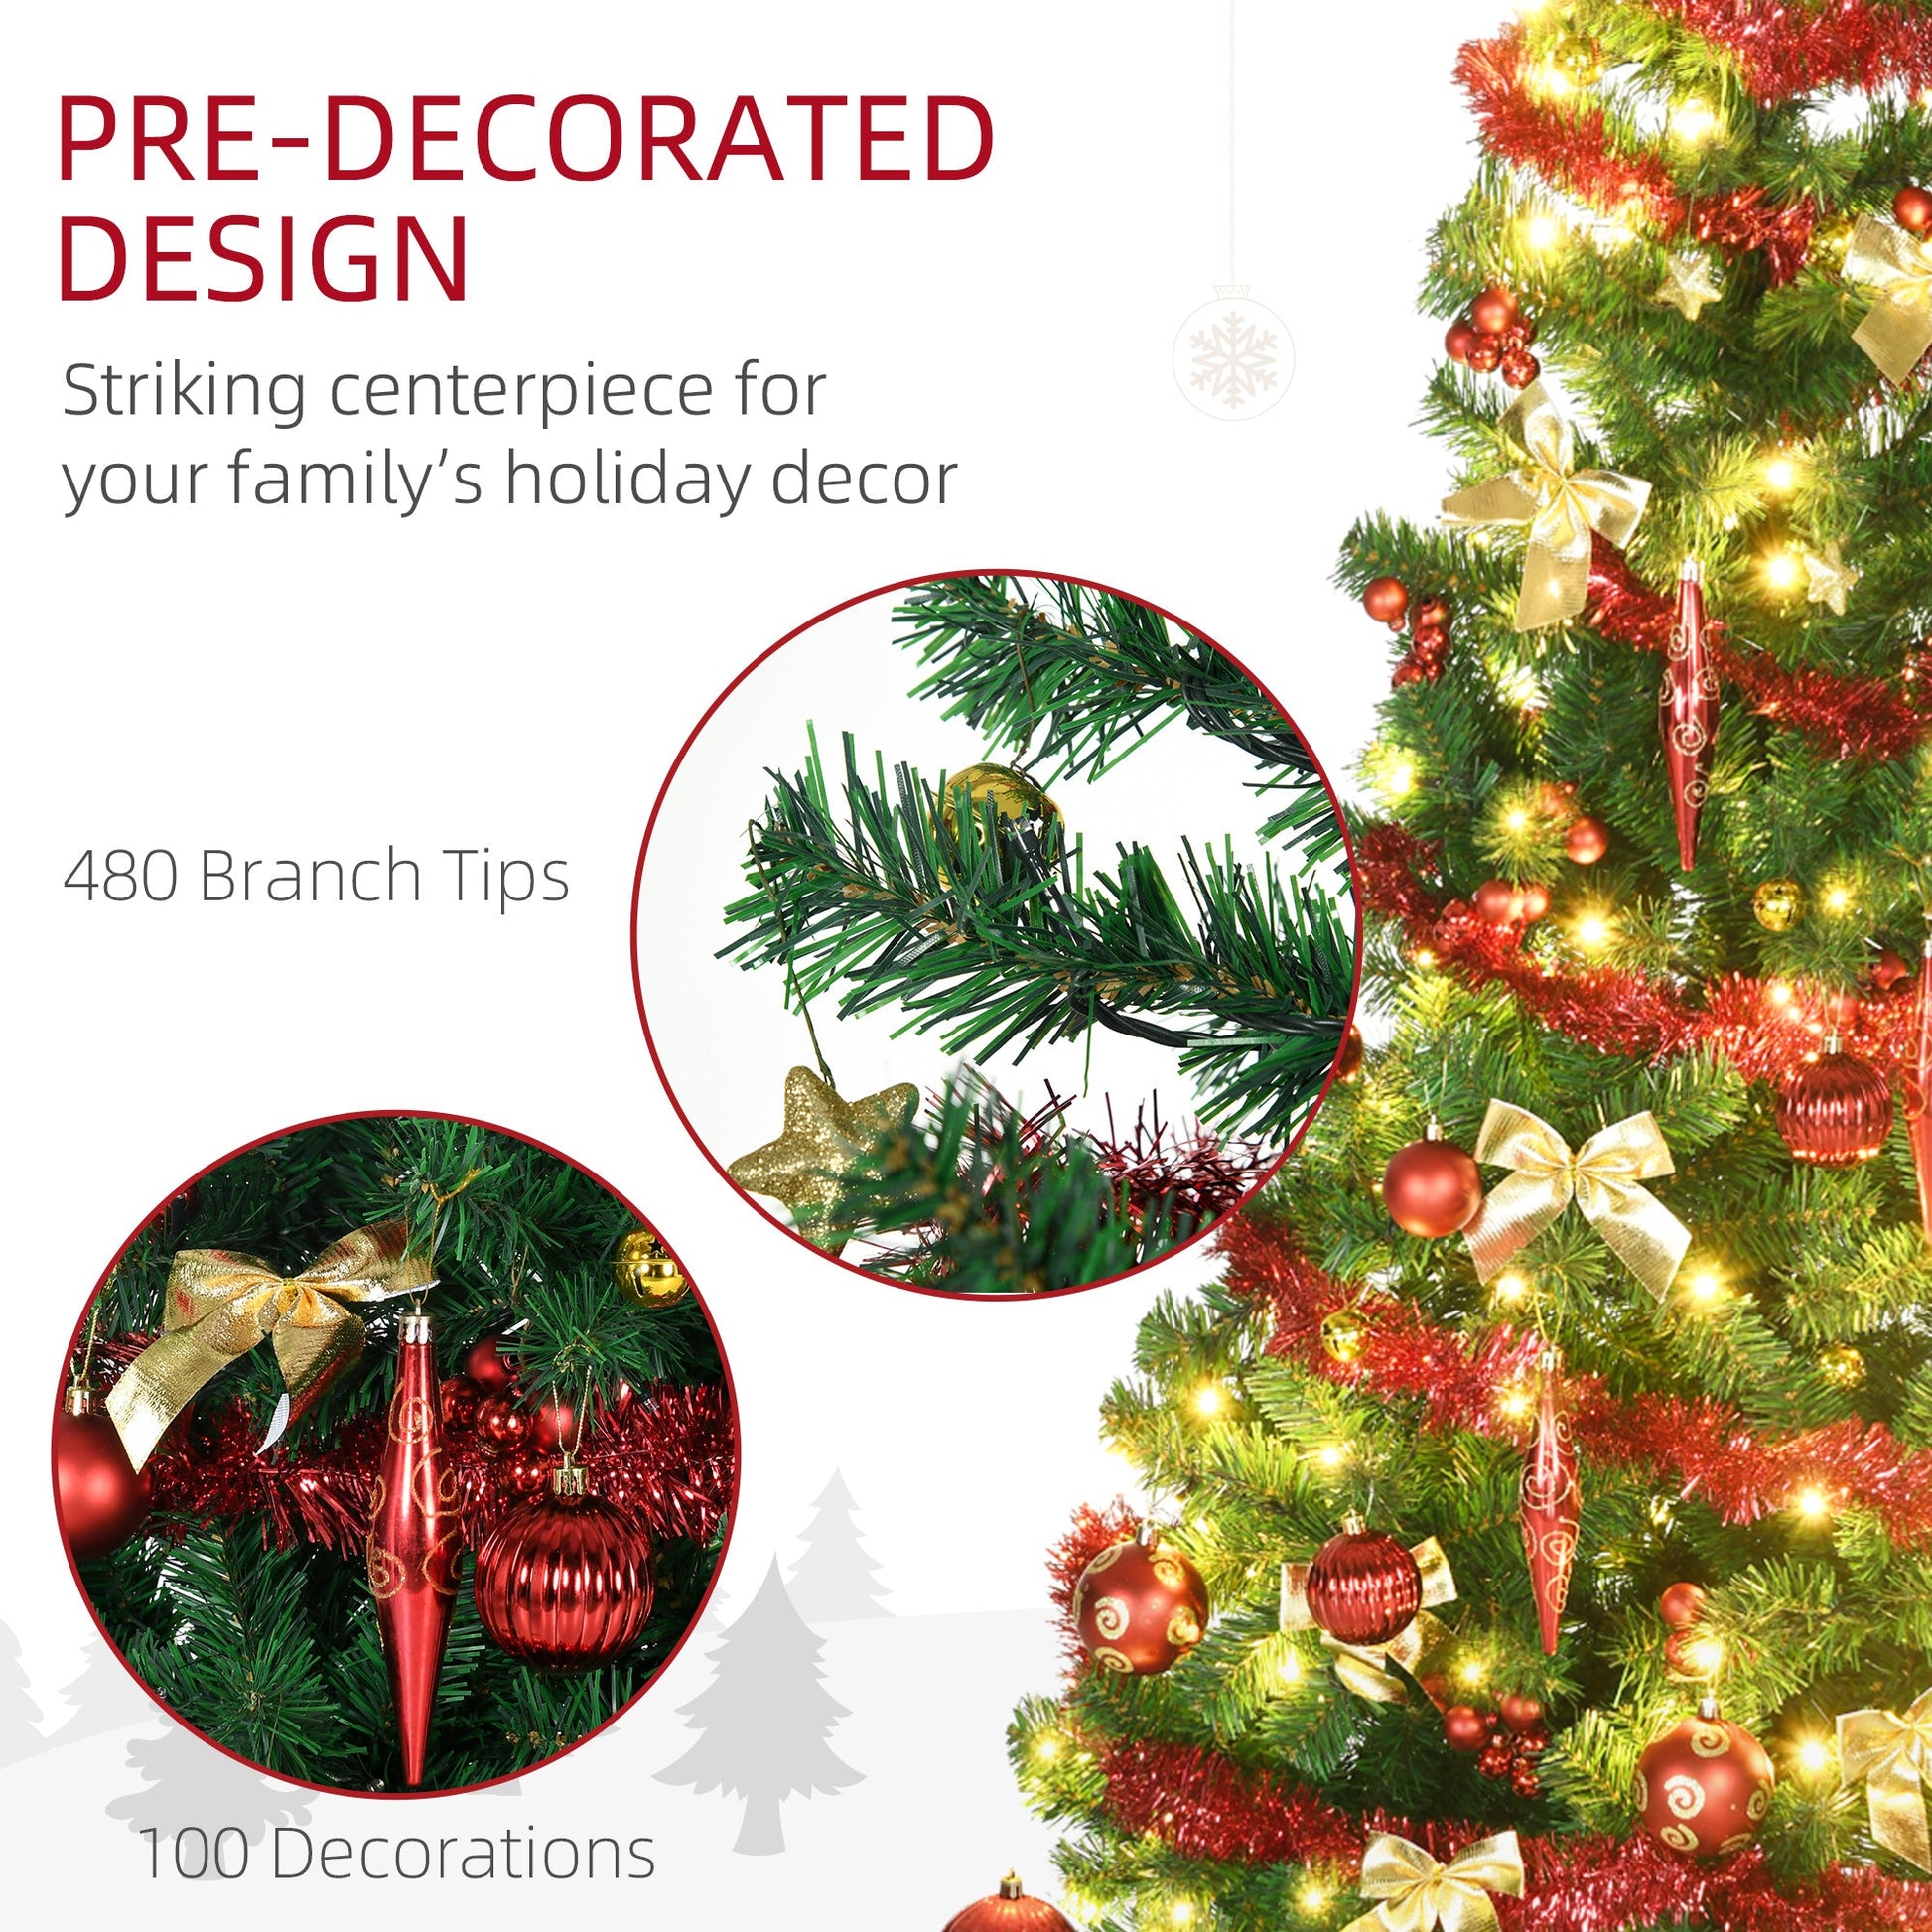 HOMCOM 6ft LED Artificial Christmas Tree with Decorations - maplin.co.uk